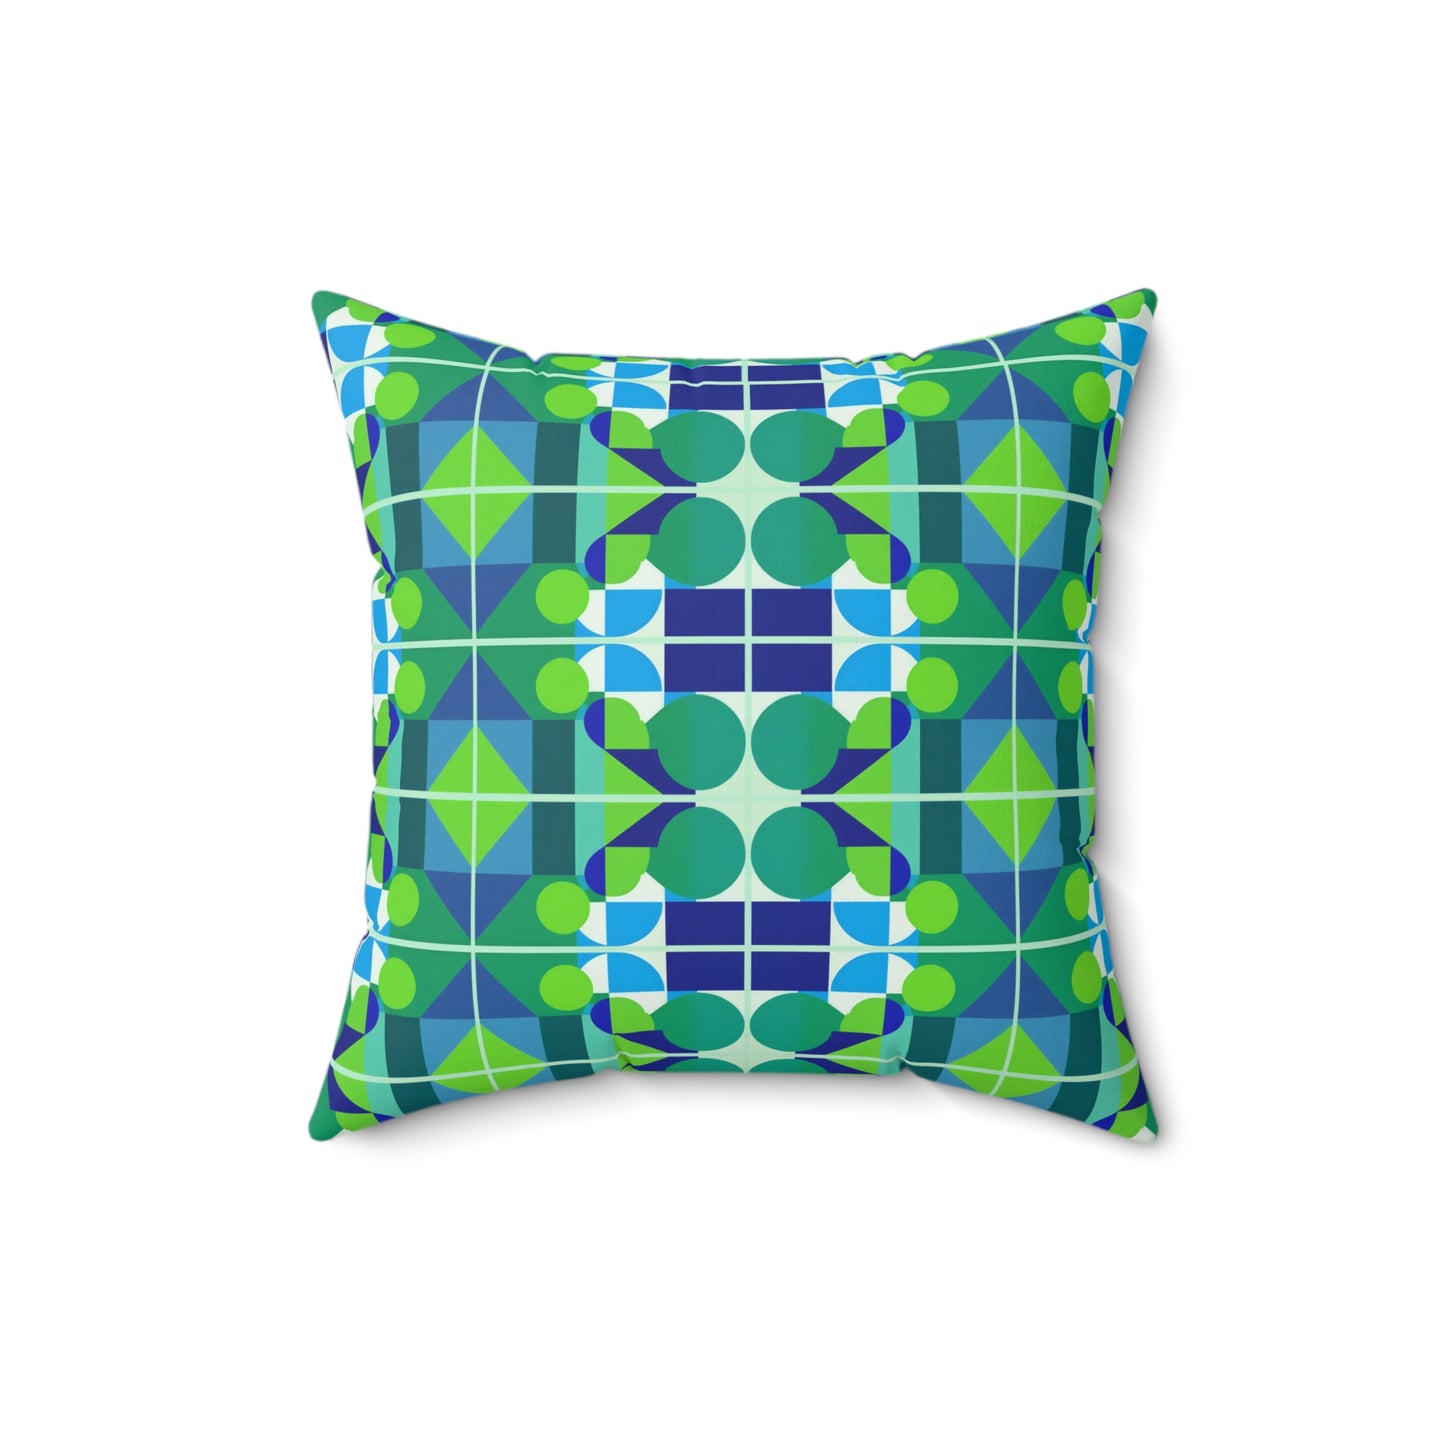 Mid Century Modern Blue and Green Abstract Geometric Pop Art Square Pillow